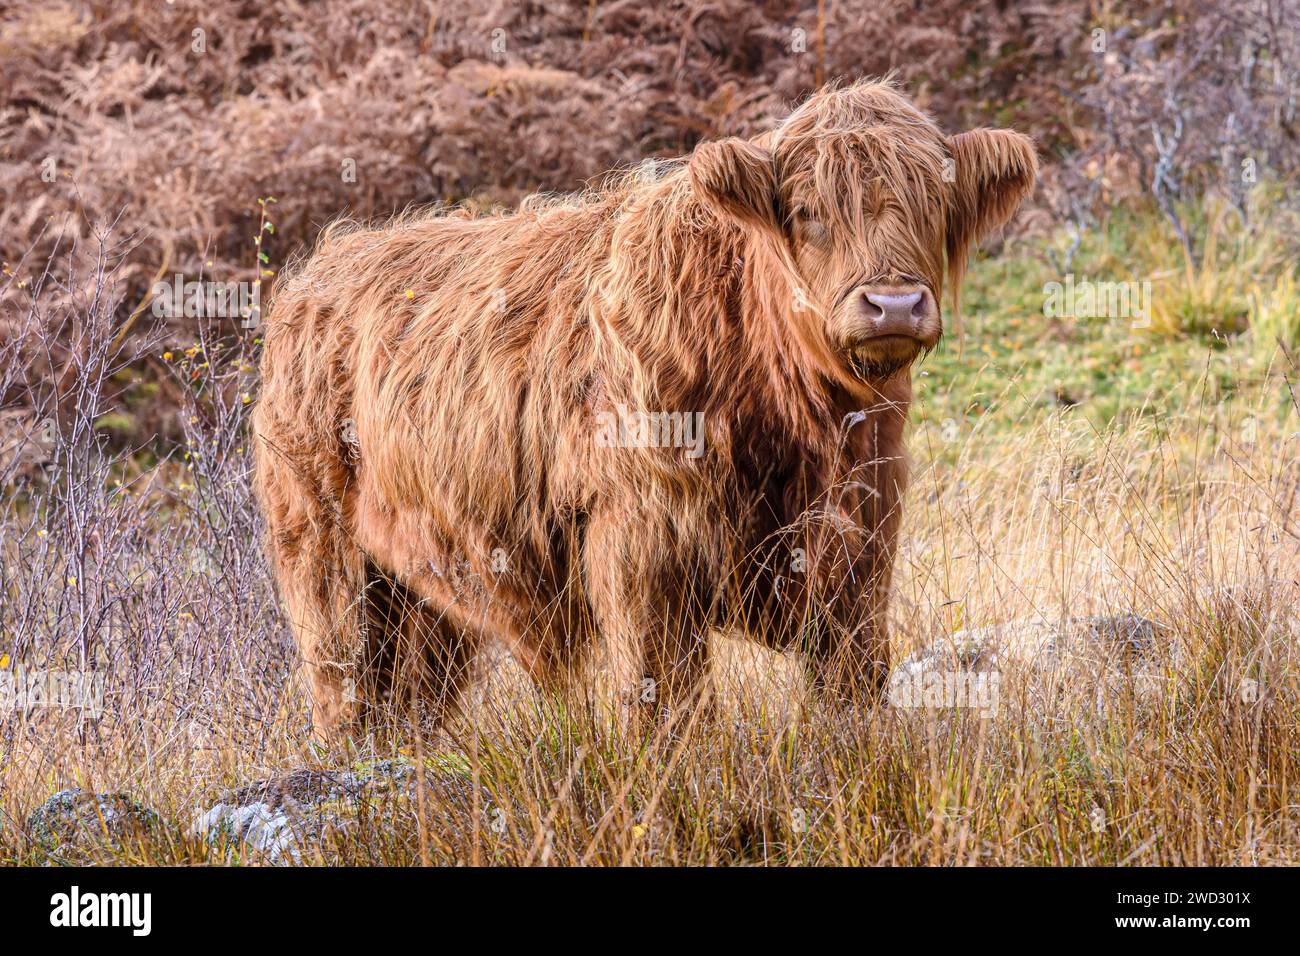 Highland cow Bos taurus taurus, standing on edge of hillside in grasses looking eyes to camera, sunlit, Cairngorm National park, Scotland, October, Stock Photo